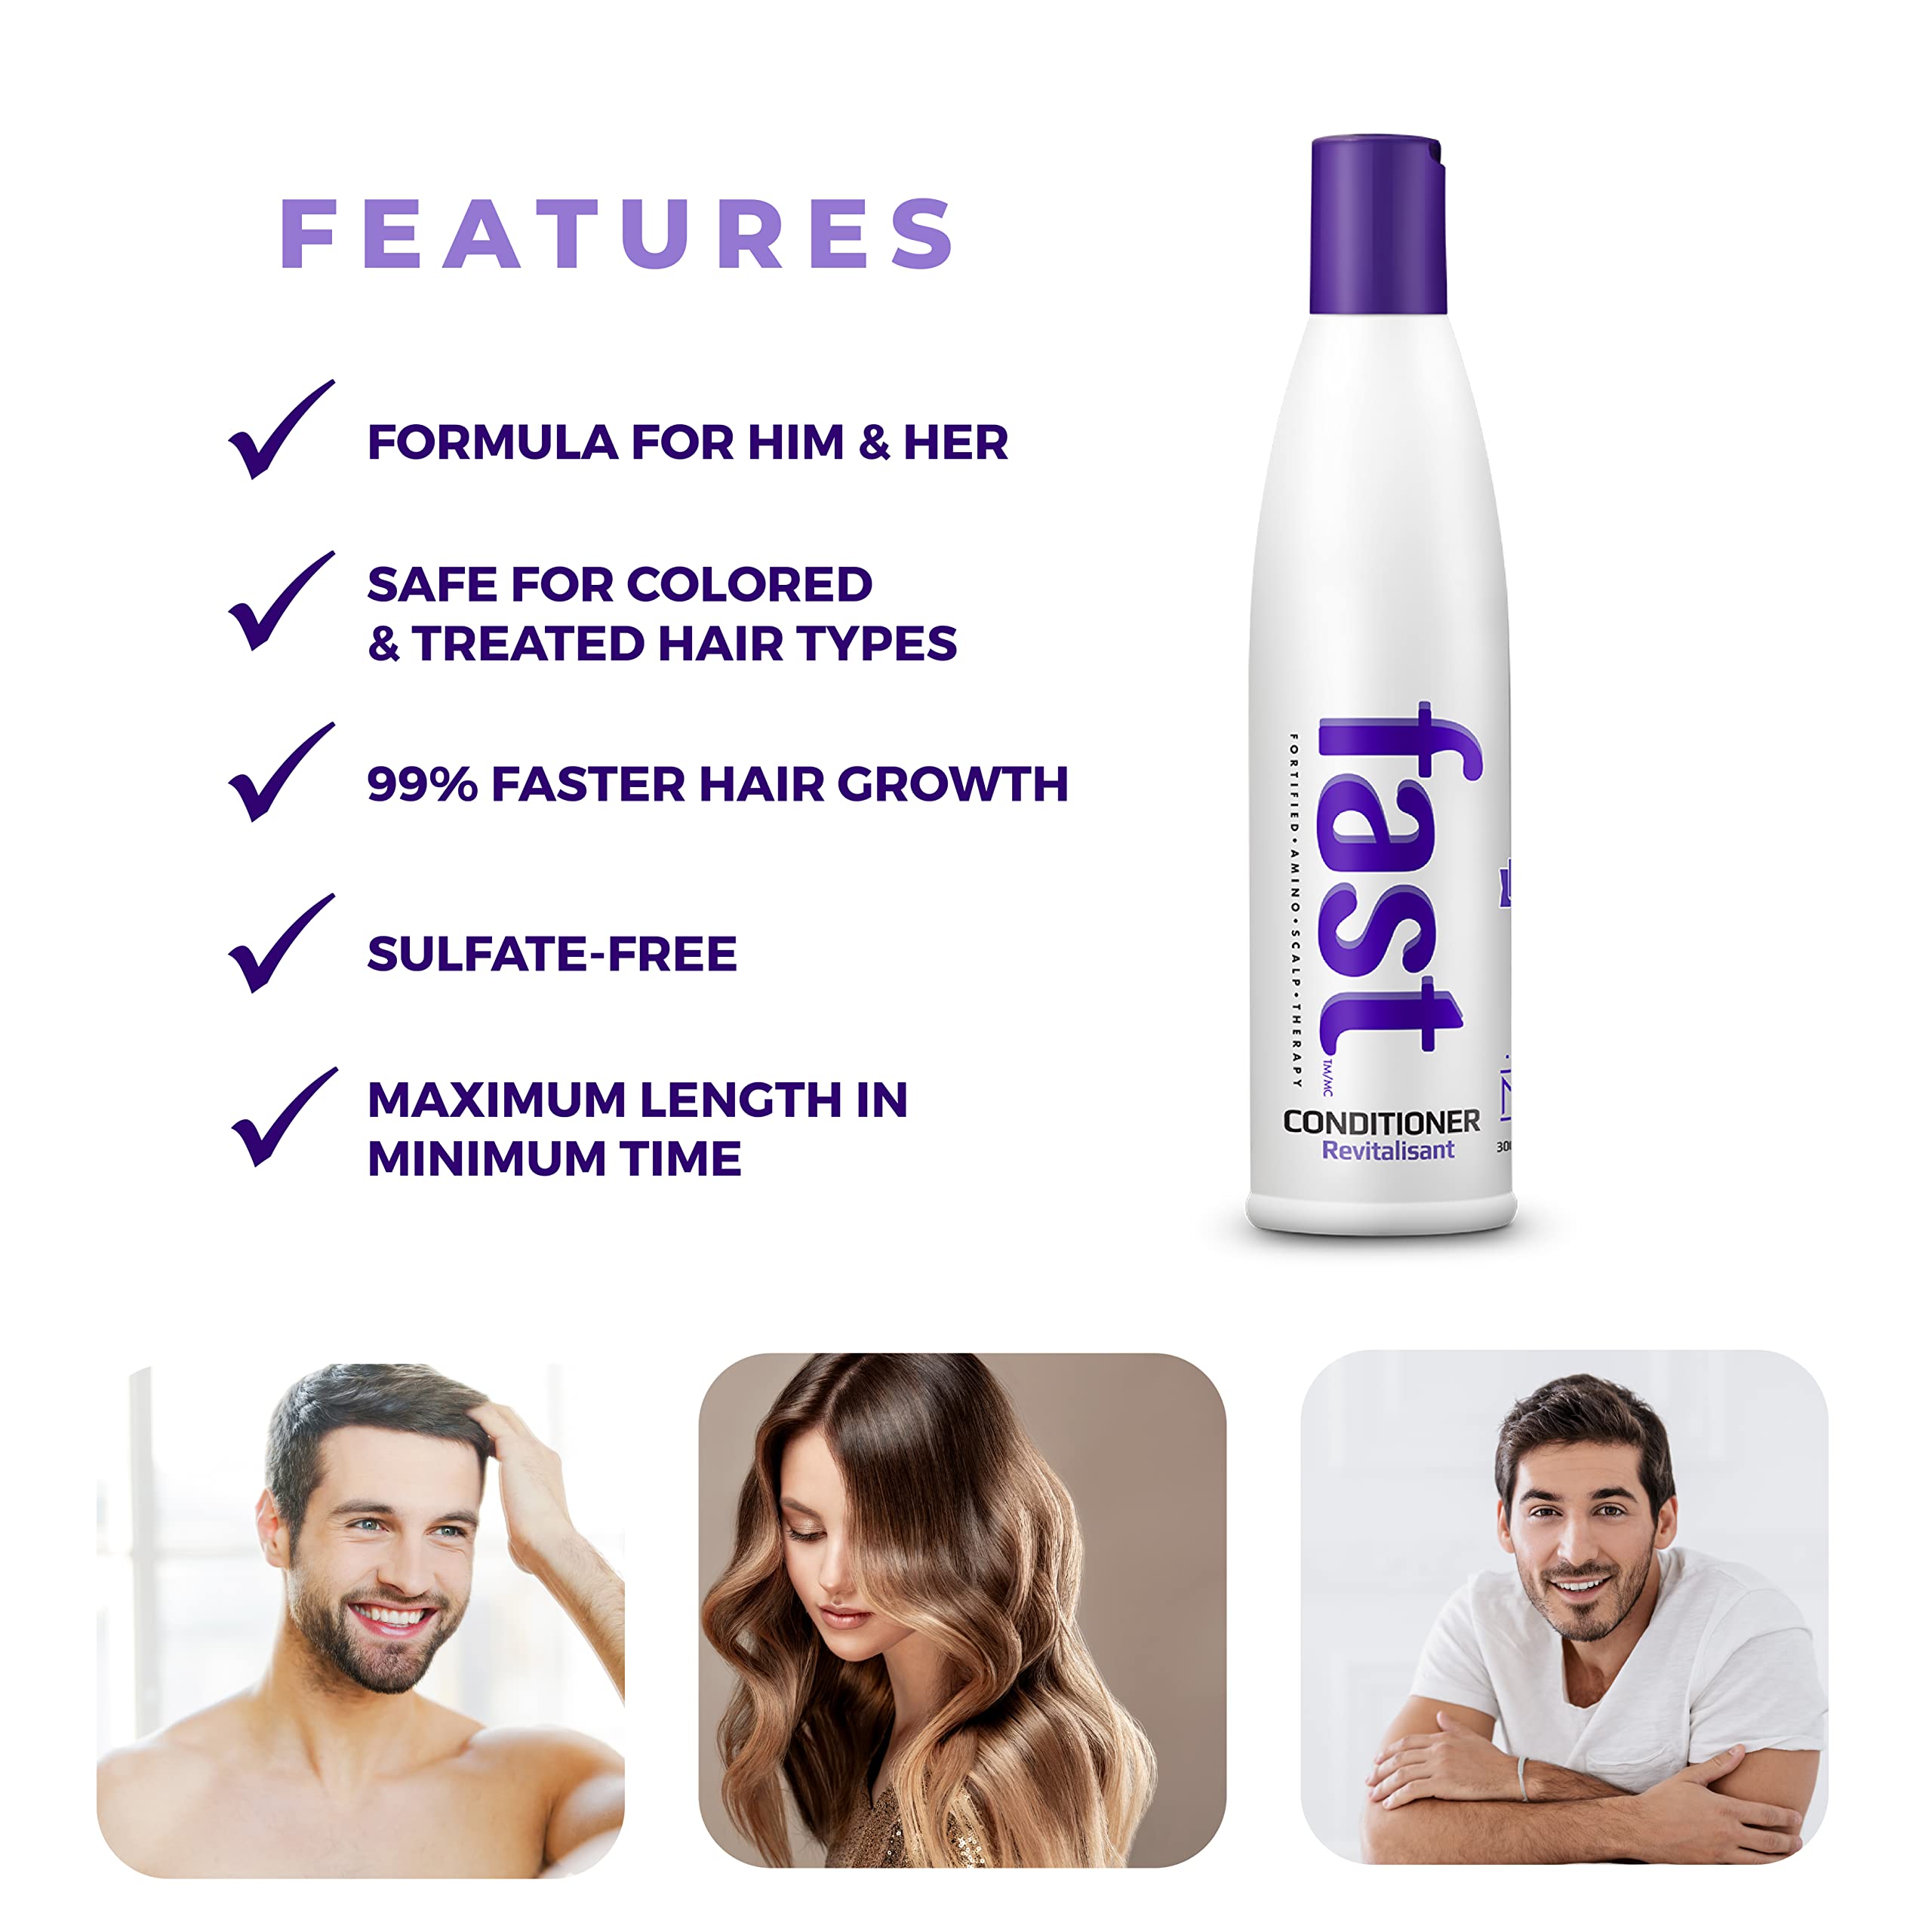 Nisim F.A.S.T Fortified Amino Scalp Therapy Conditioner for Hair Growth - Supports Faster & Longer Hair with Essential Nutrients, Amino Acids & Proteins - Sulfate-free, Paraben-free, 10 fl oz.